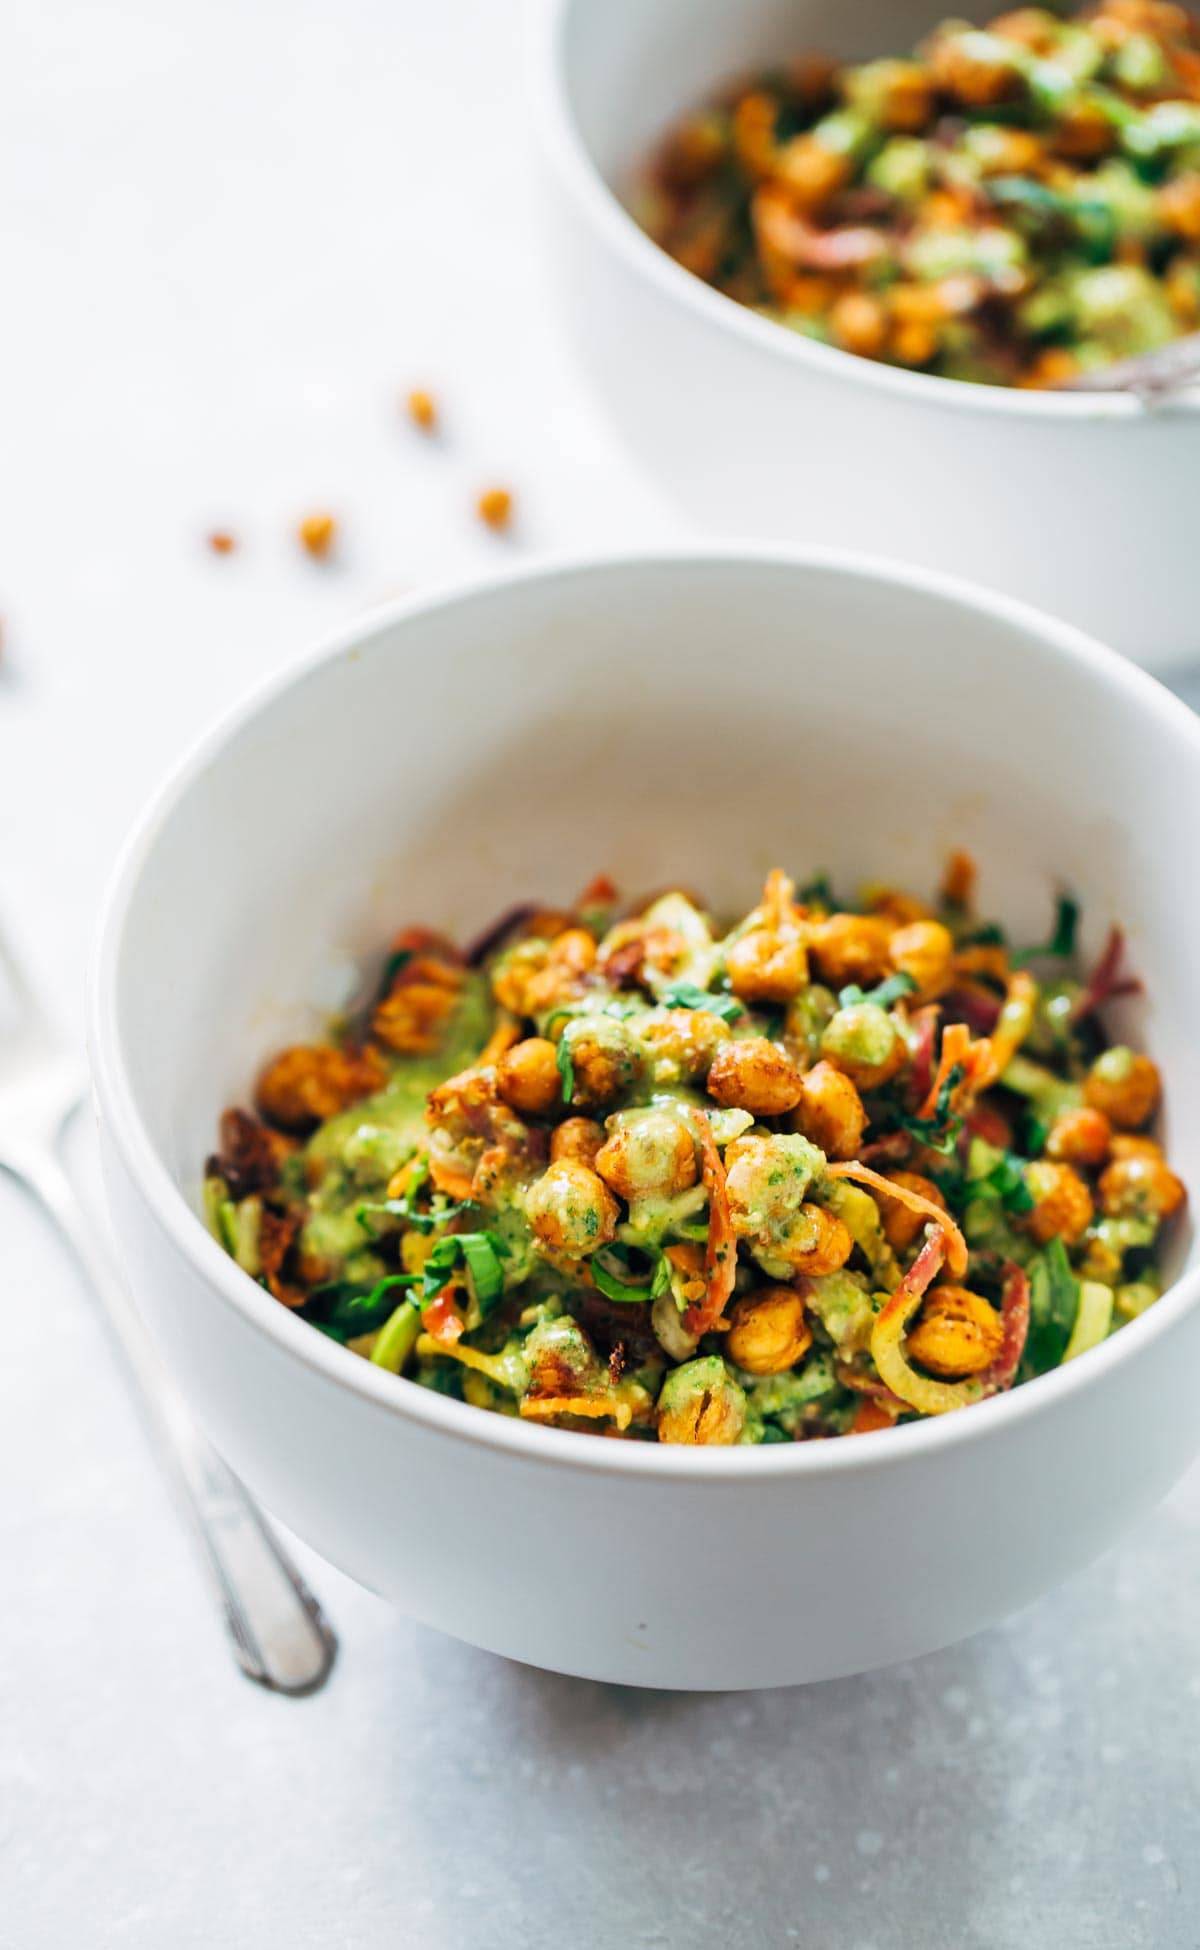 Rainbow Power Salad with Roasted Chickpeas in a bowl.